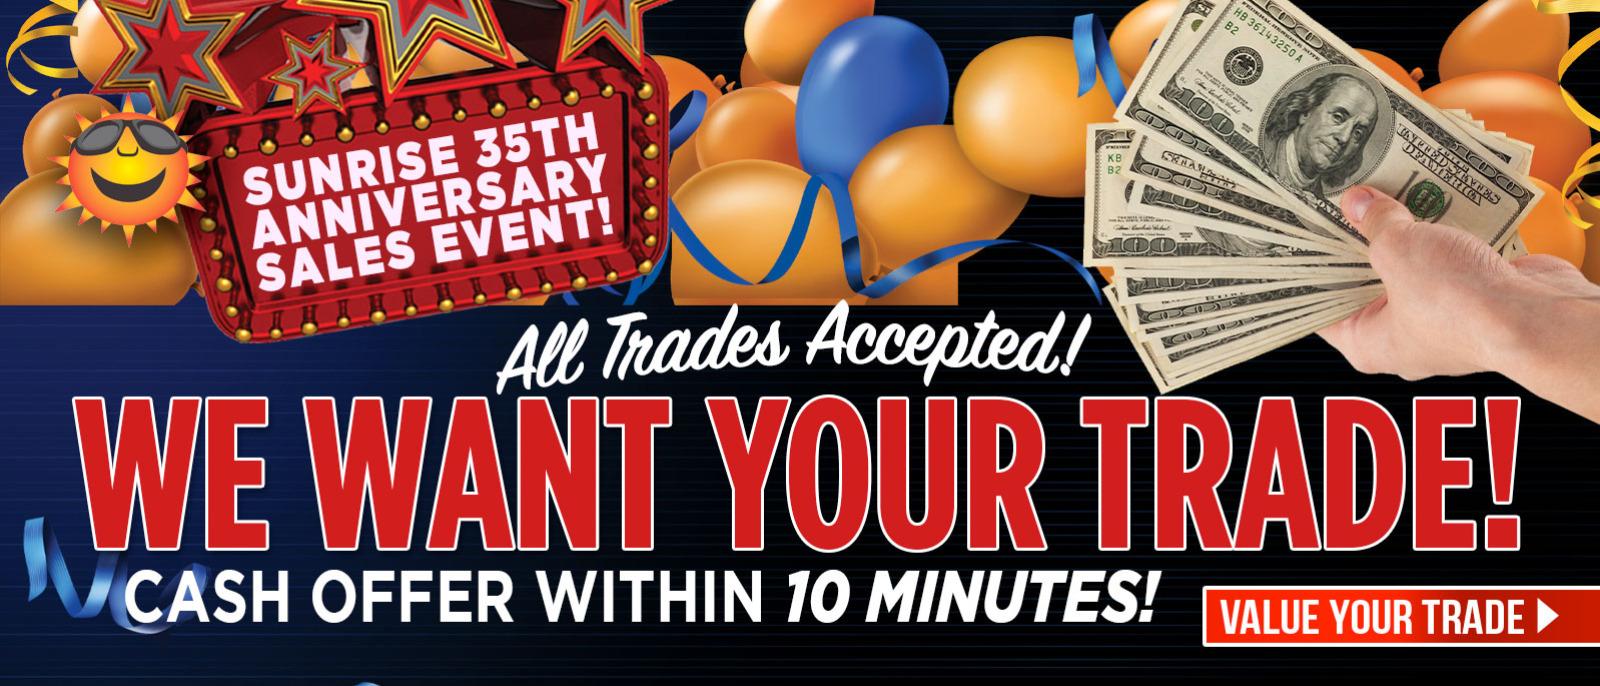 We want your trade - Cash Offer within 10 minutes - All trades accepted!